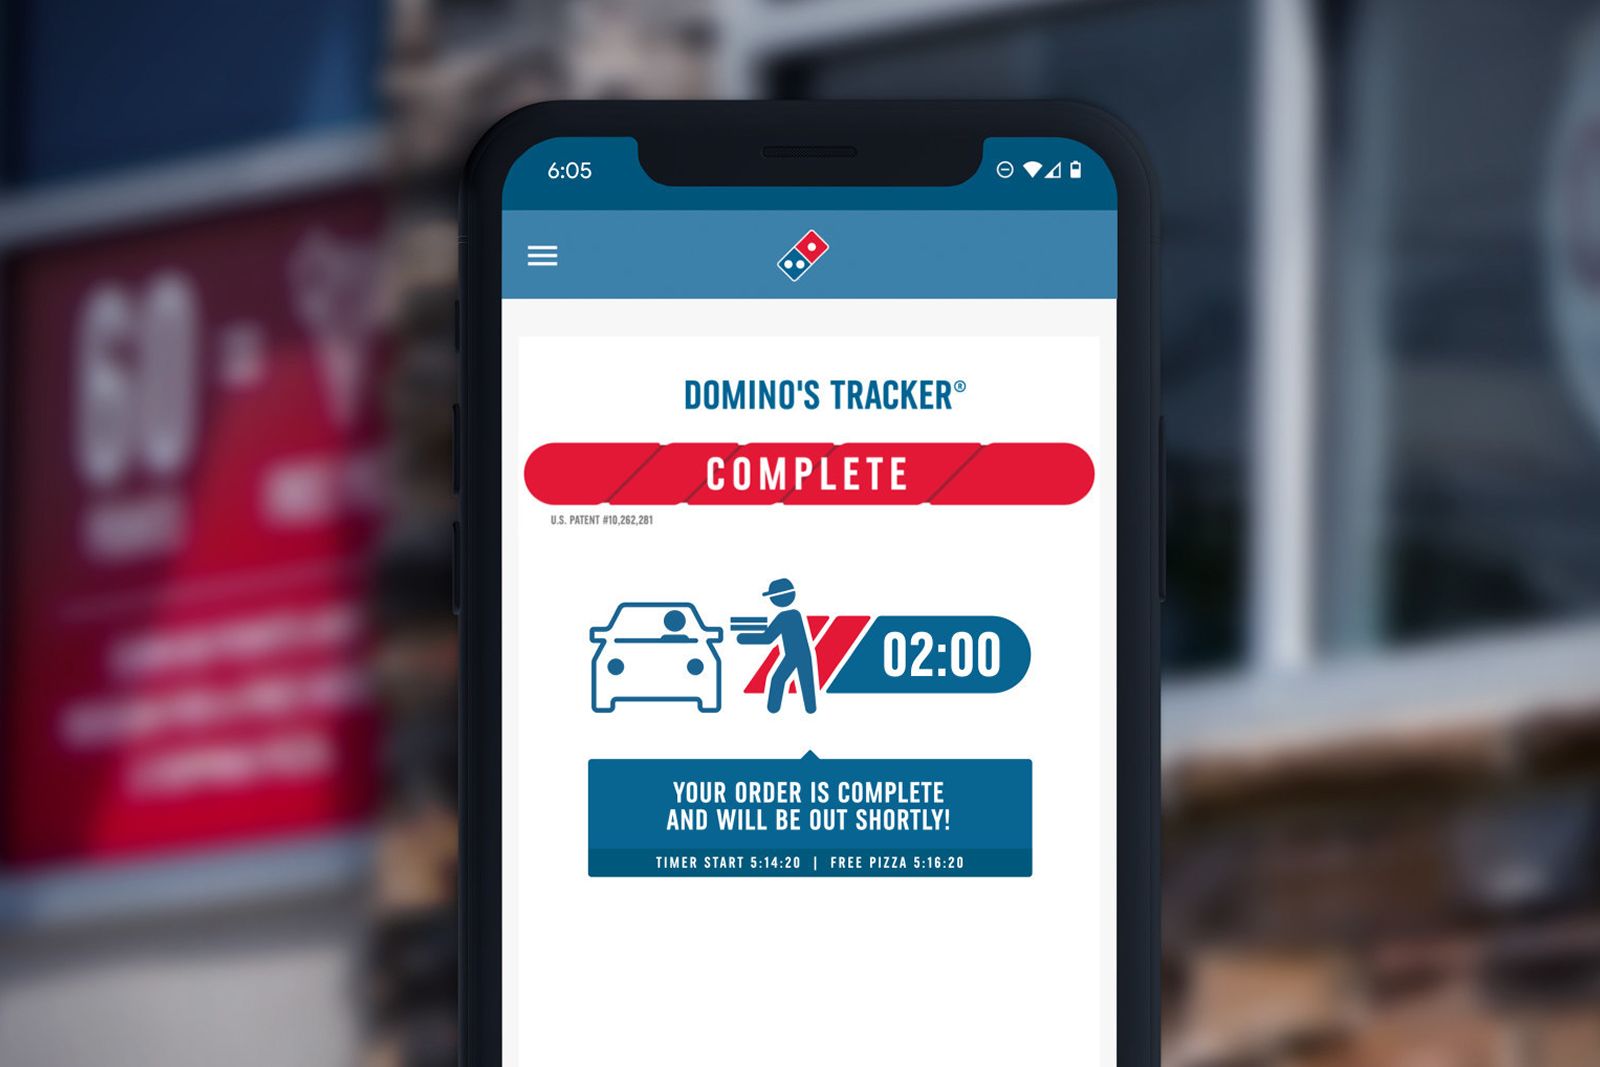 Domino's Rolls Out Carside Delivery 2-Minute Guarantee